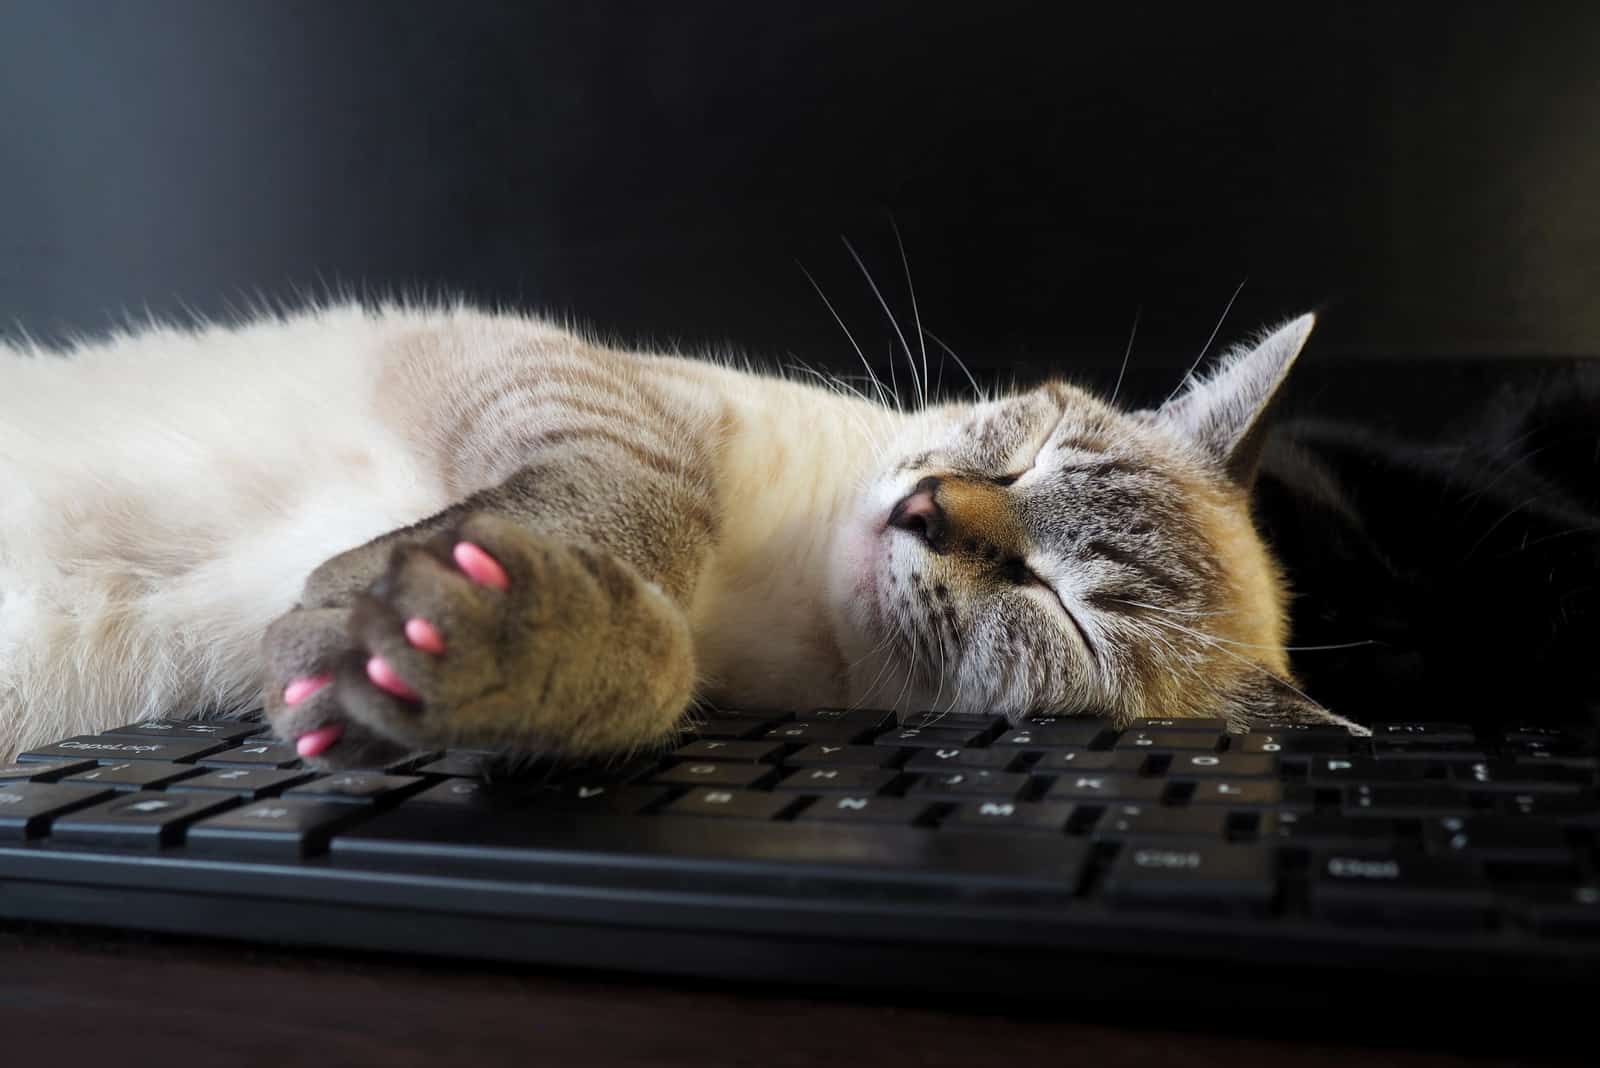 a cat with pink caps on its nails sleeps on the keyboard